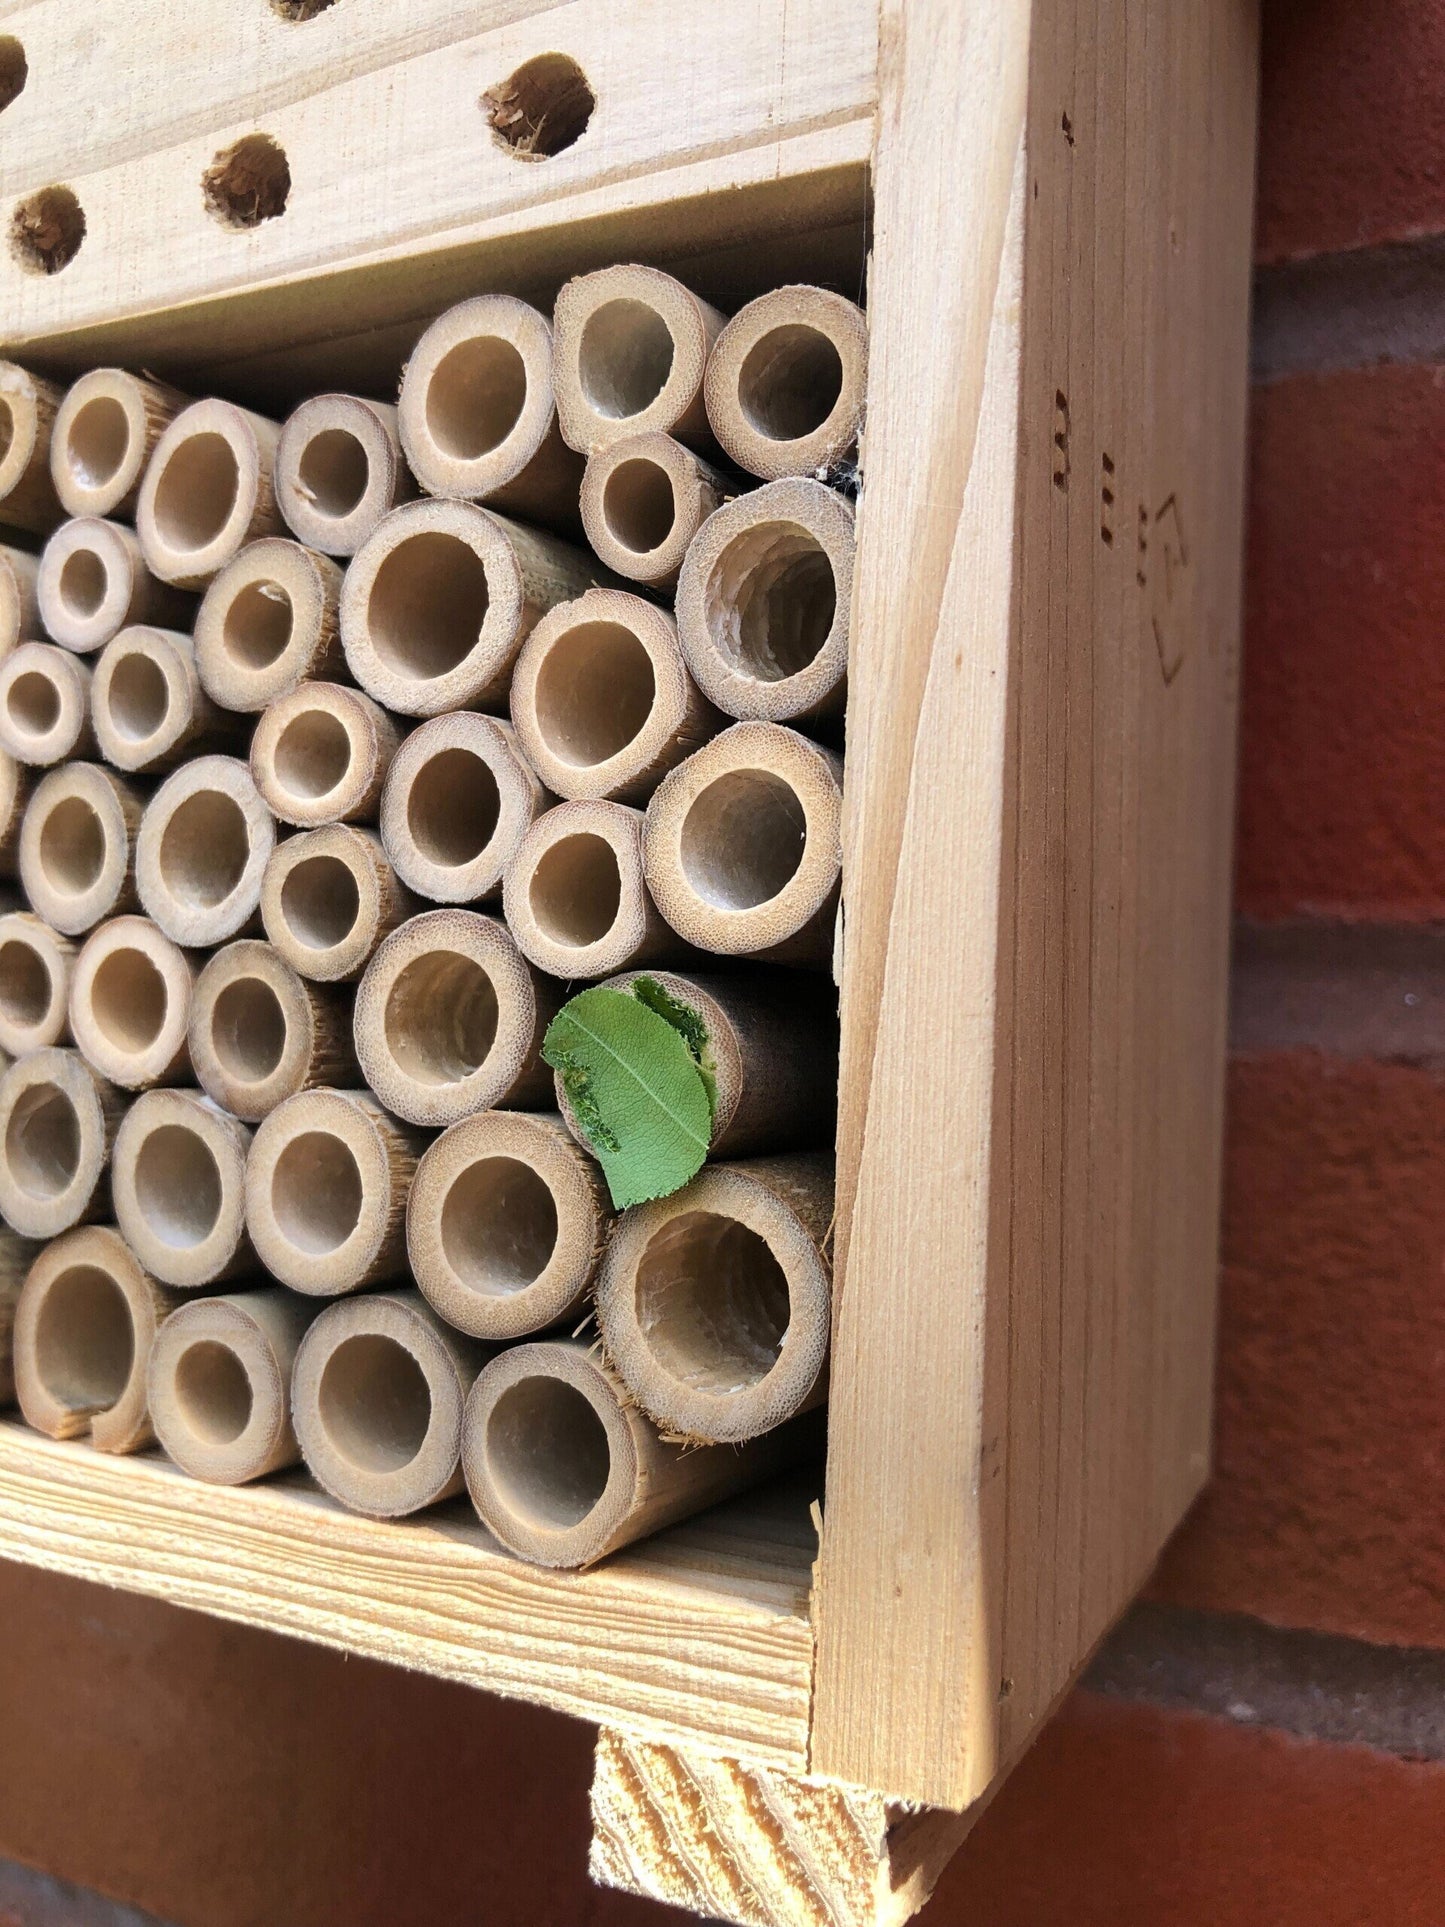 bee hotel 2.0 in situ located on a red brick wall.  tiny green leaf covering one of the wooden tubes - available from beevive.com